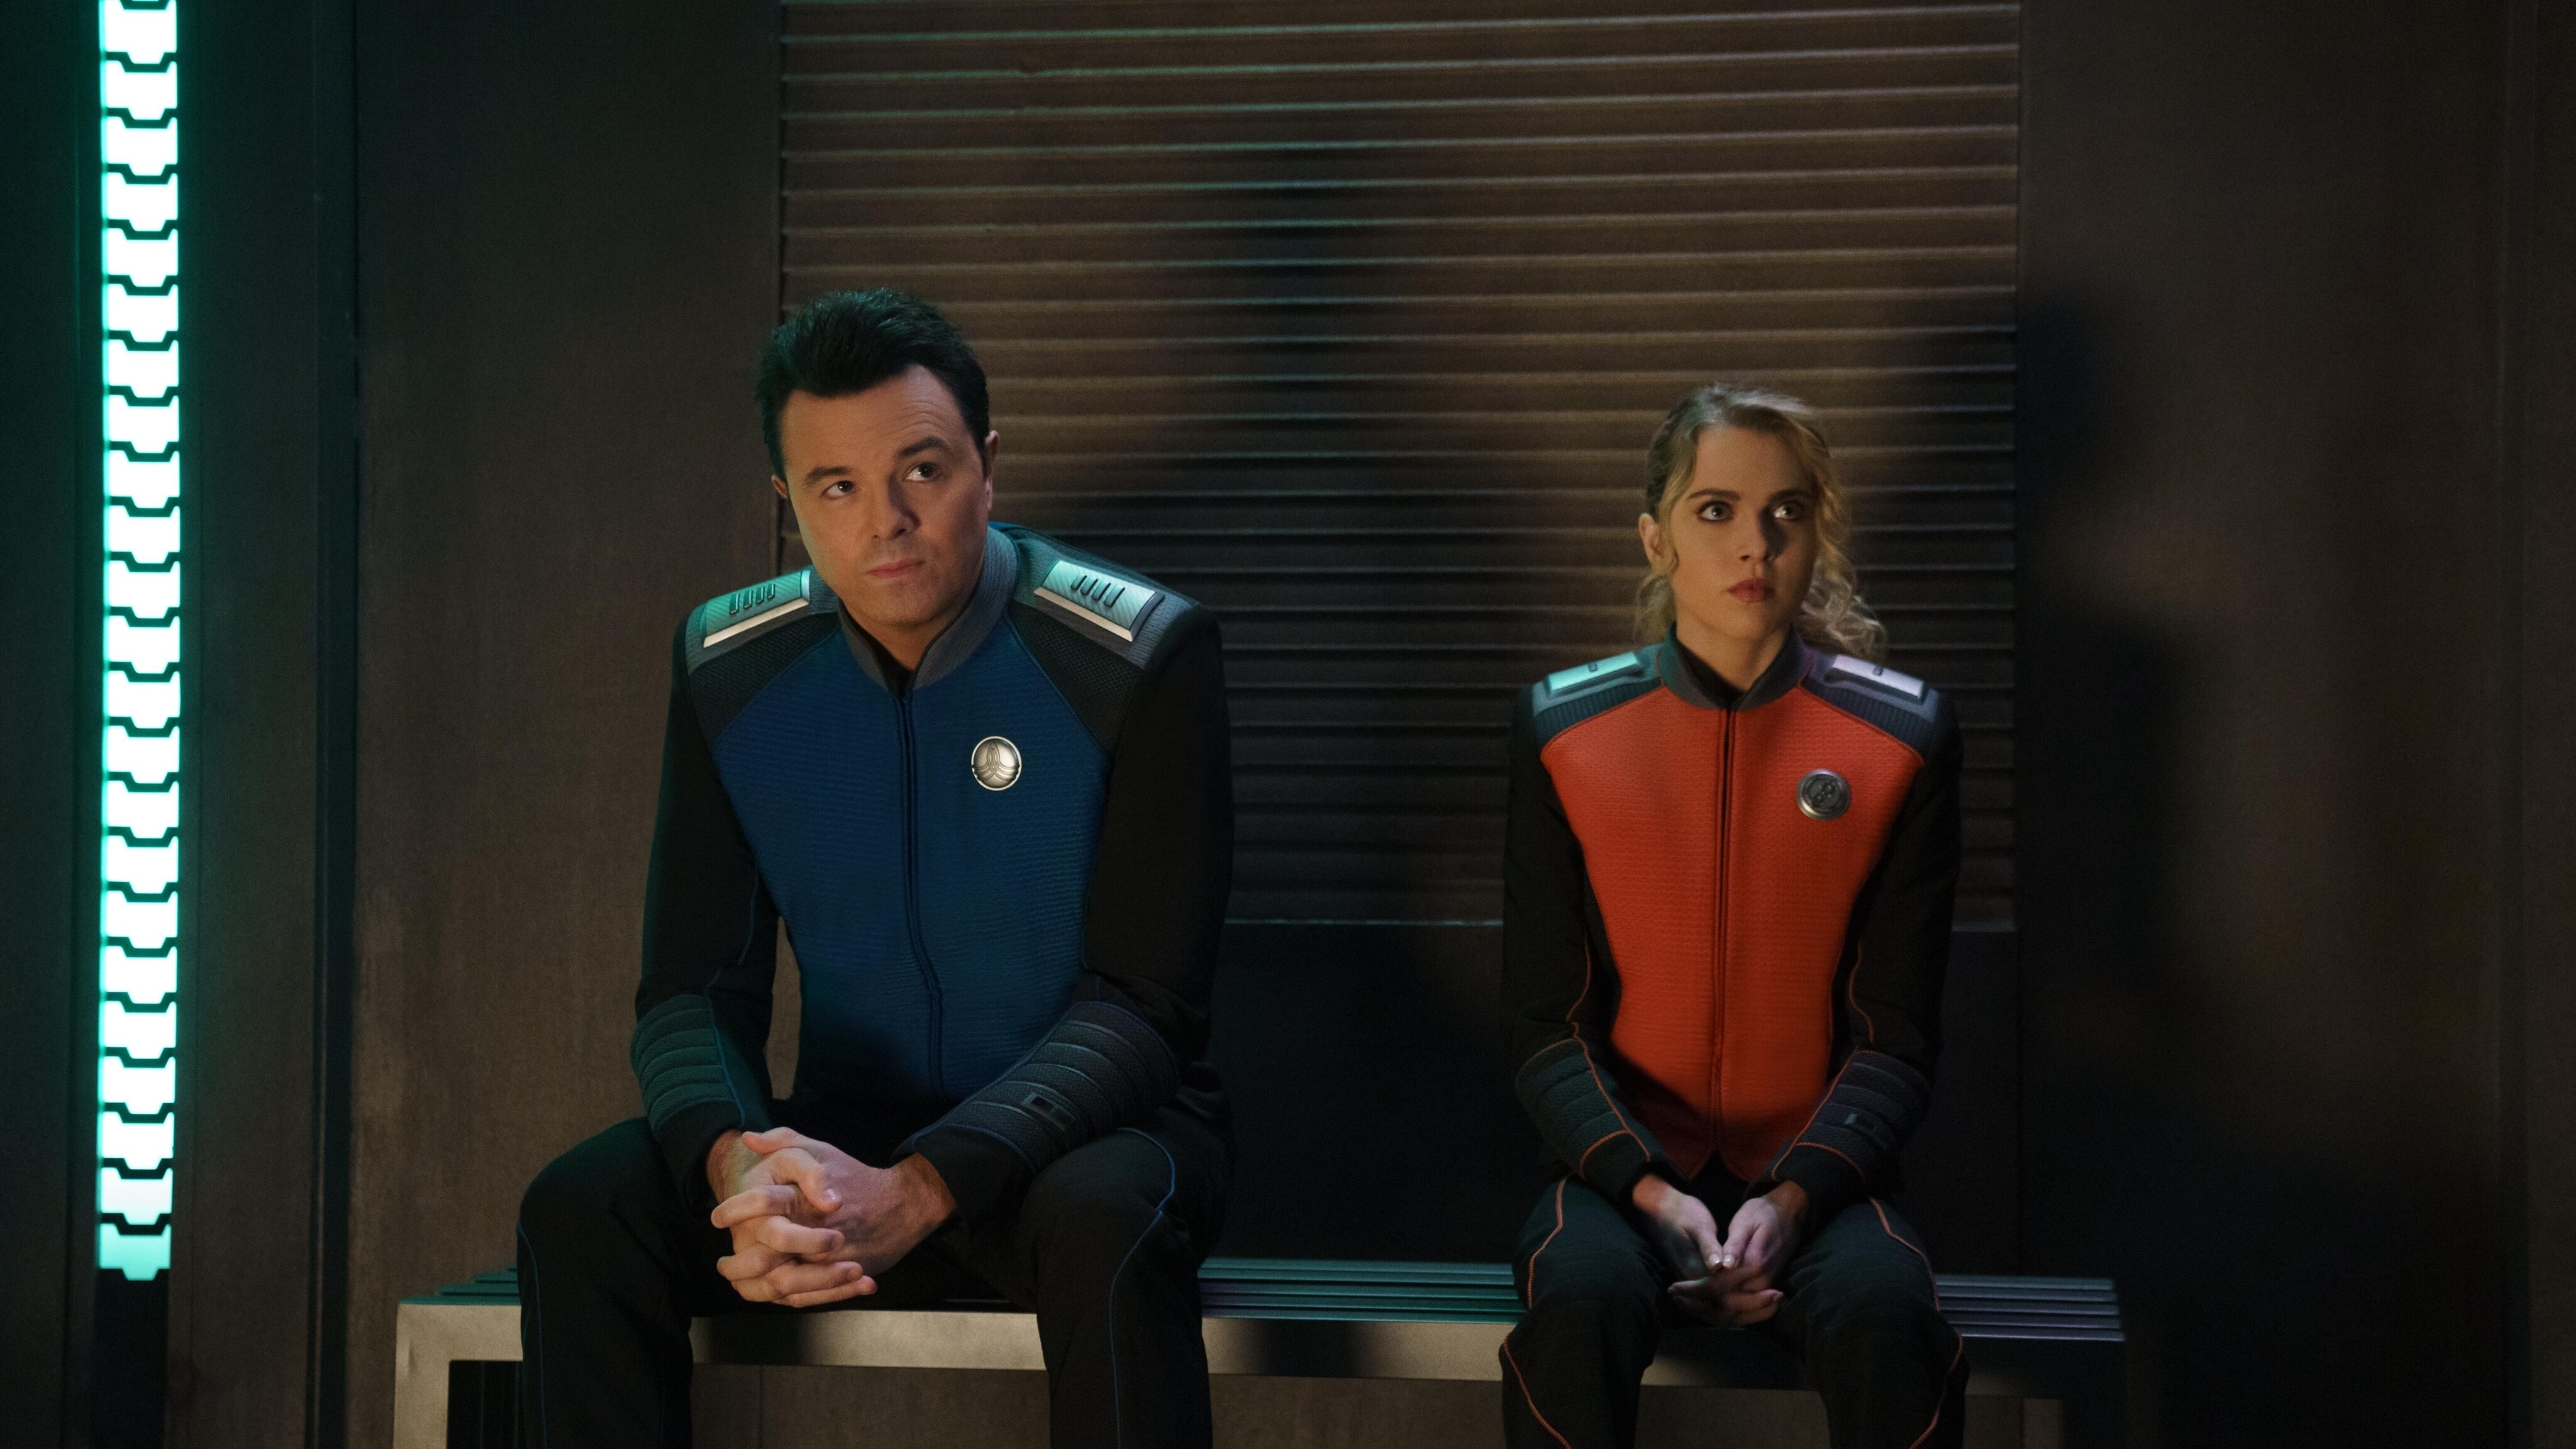 The Orville: New Horizons -- “Gently Falling Rain” - Episode 304 -- The Orville crew leads a Union delegation to sign a peace treaty with the Krill. Capt. Ed Mercer (Seth MacFarlane) and Charly Burke (Anne Winters), shown. (Photo by: Michael Desmond/Hulu)